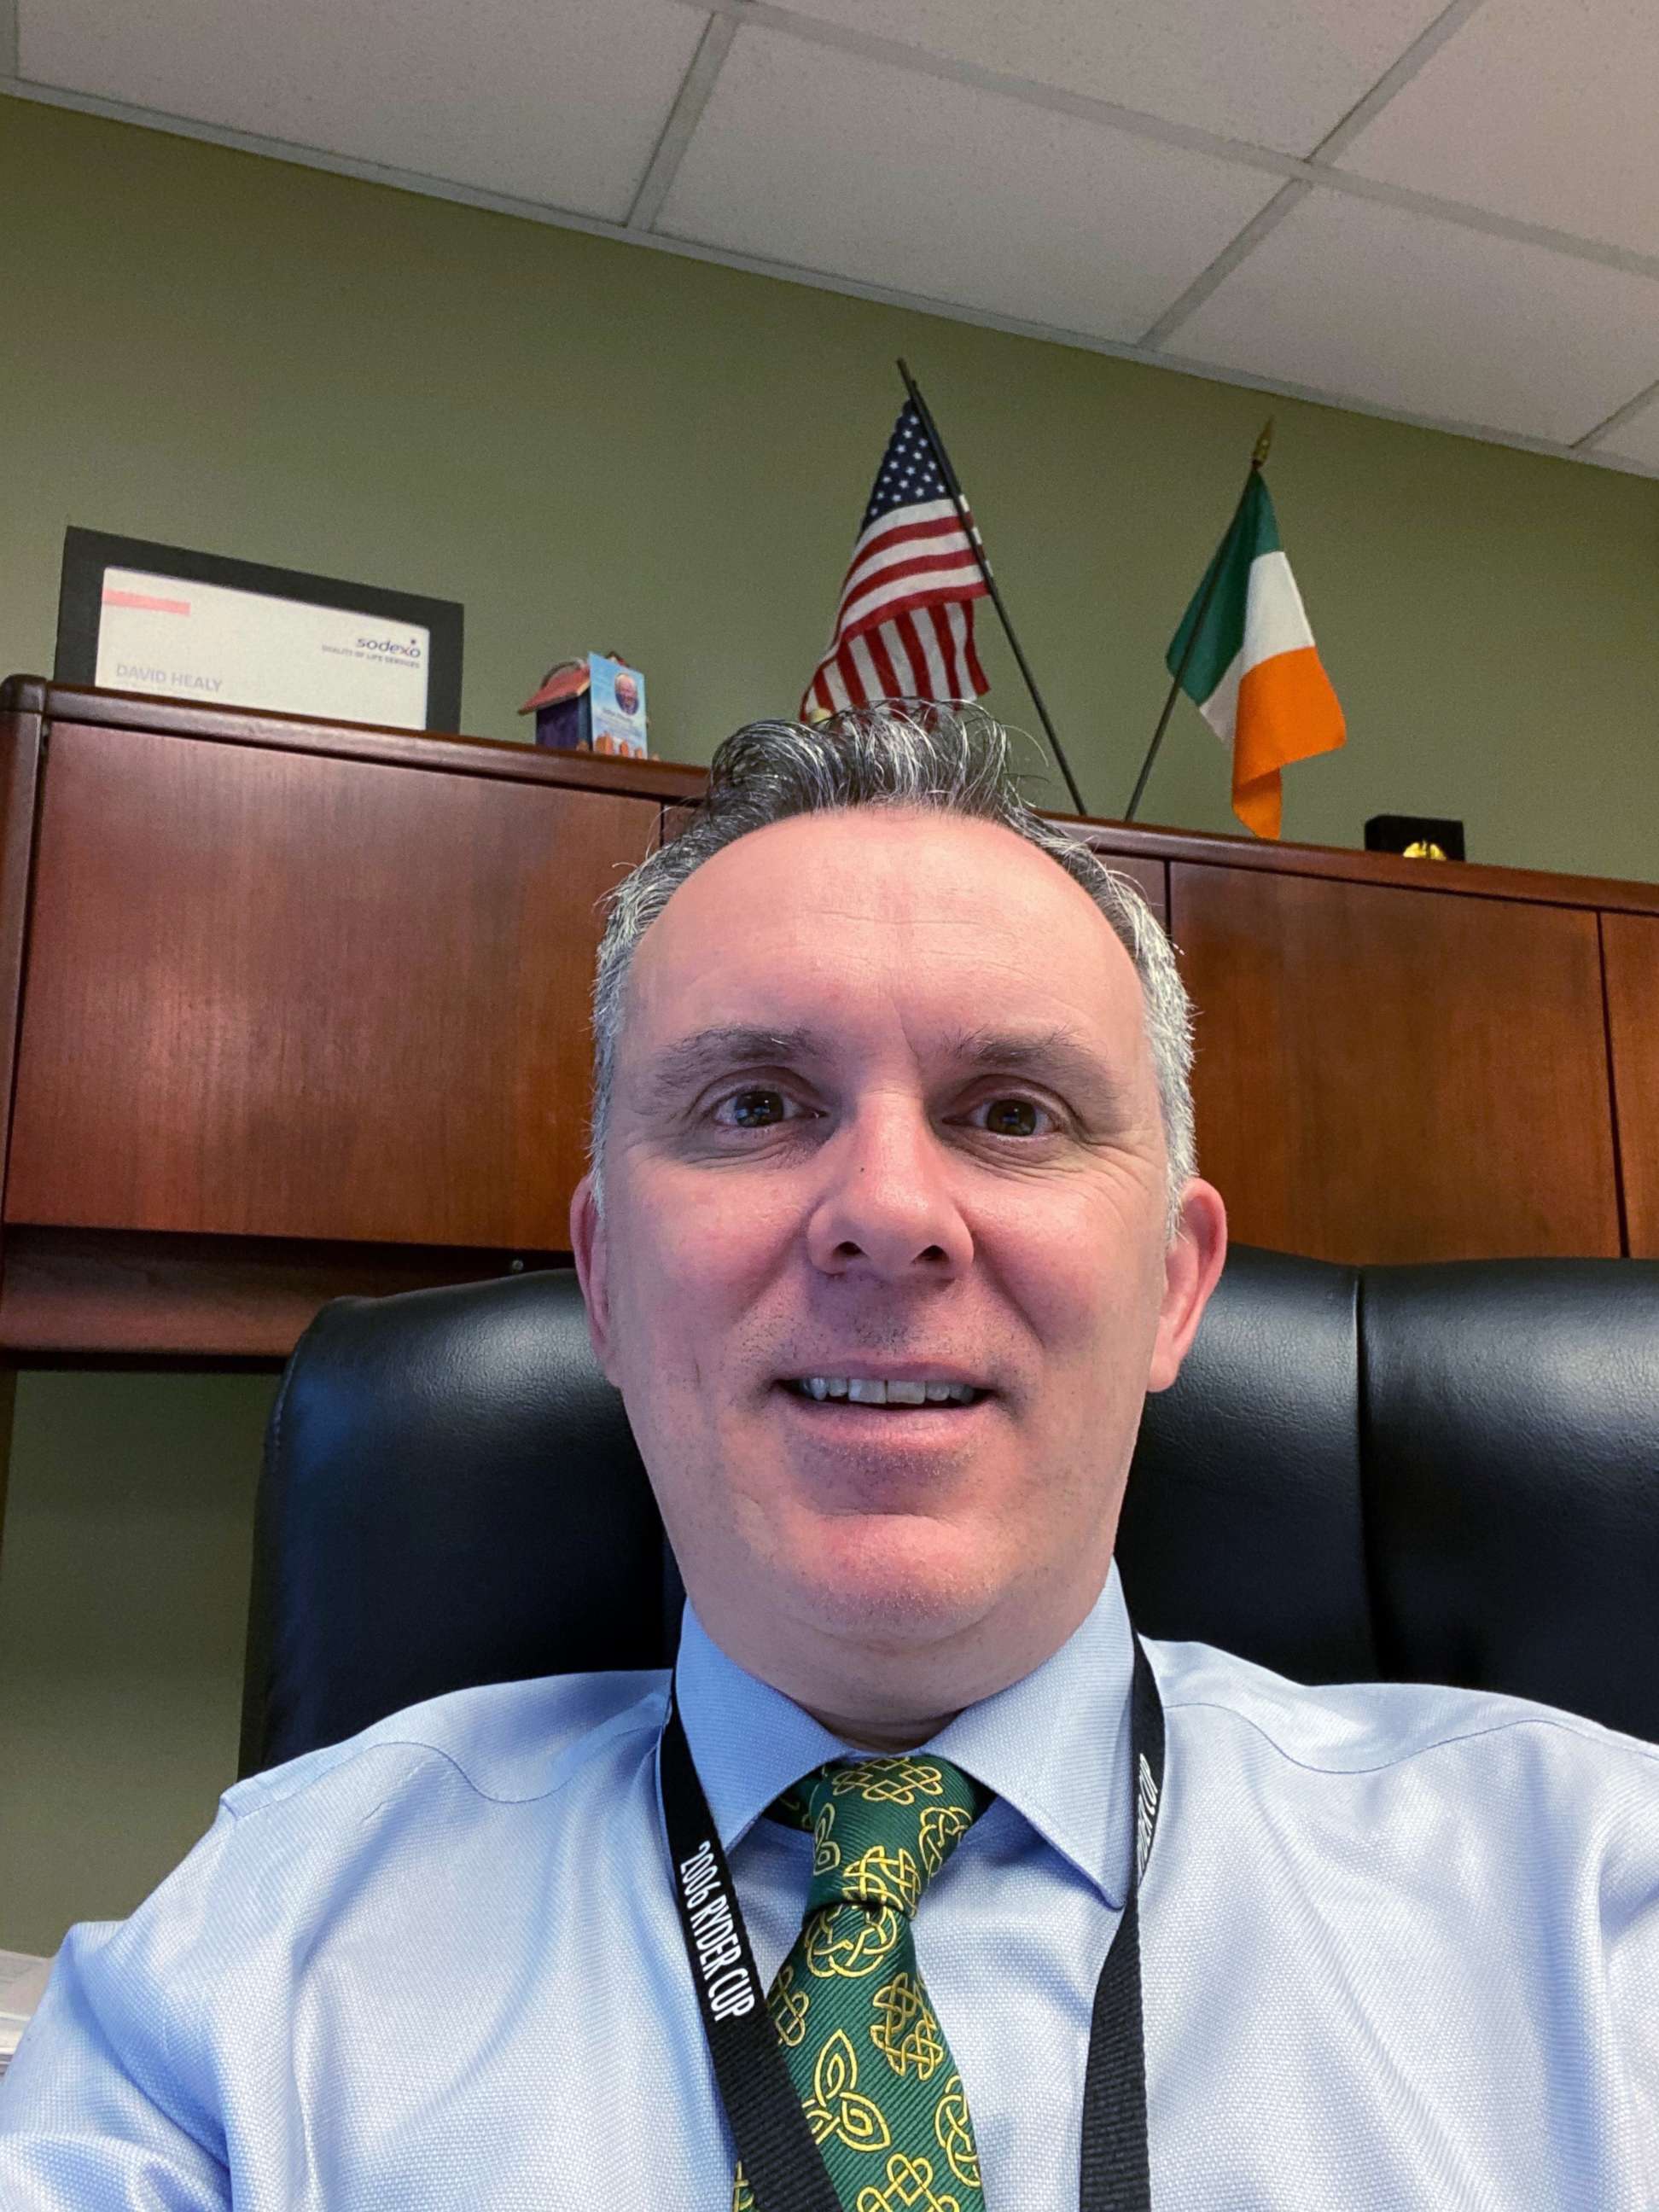 PHOTO: David Healy sits at his desk at Grady Hospital in Atlanta dressed for St. Patrick's Day on March 17, 2020.